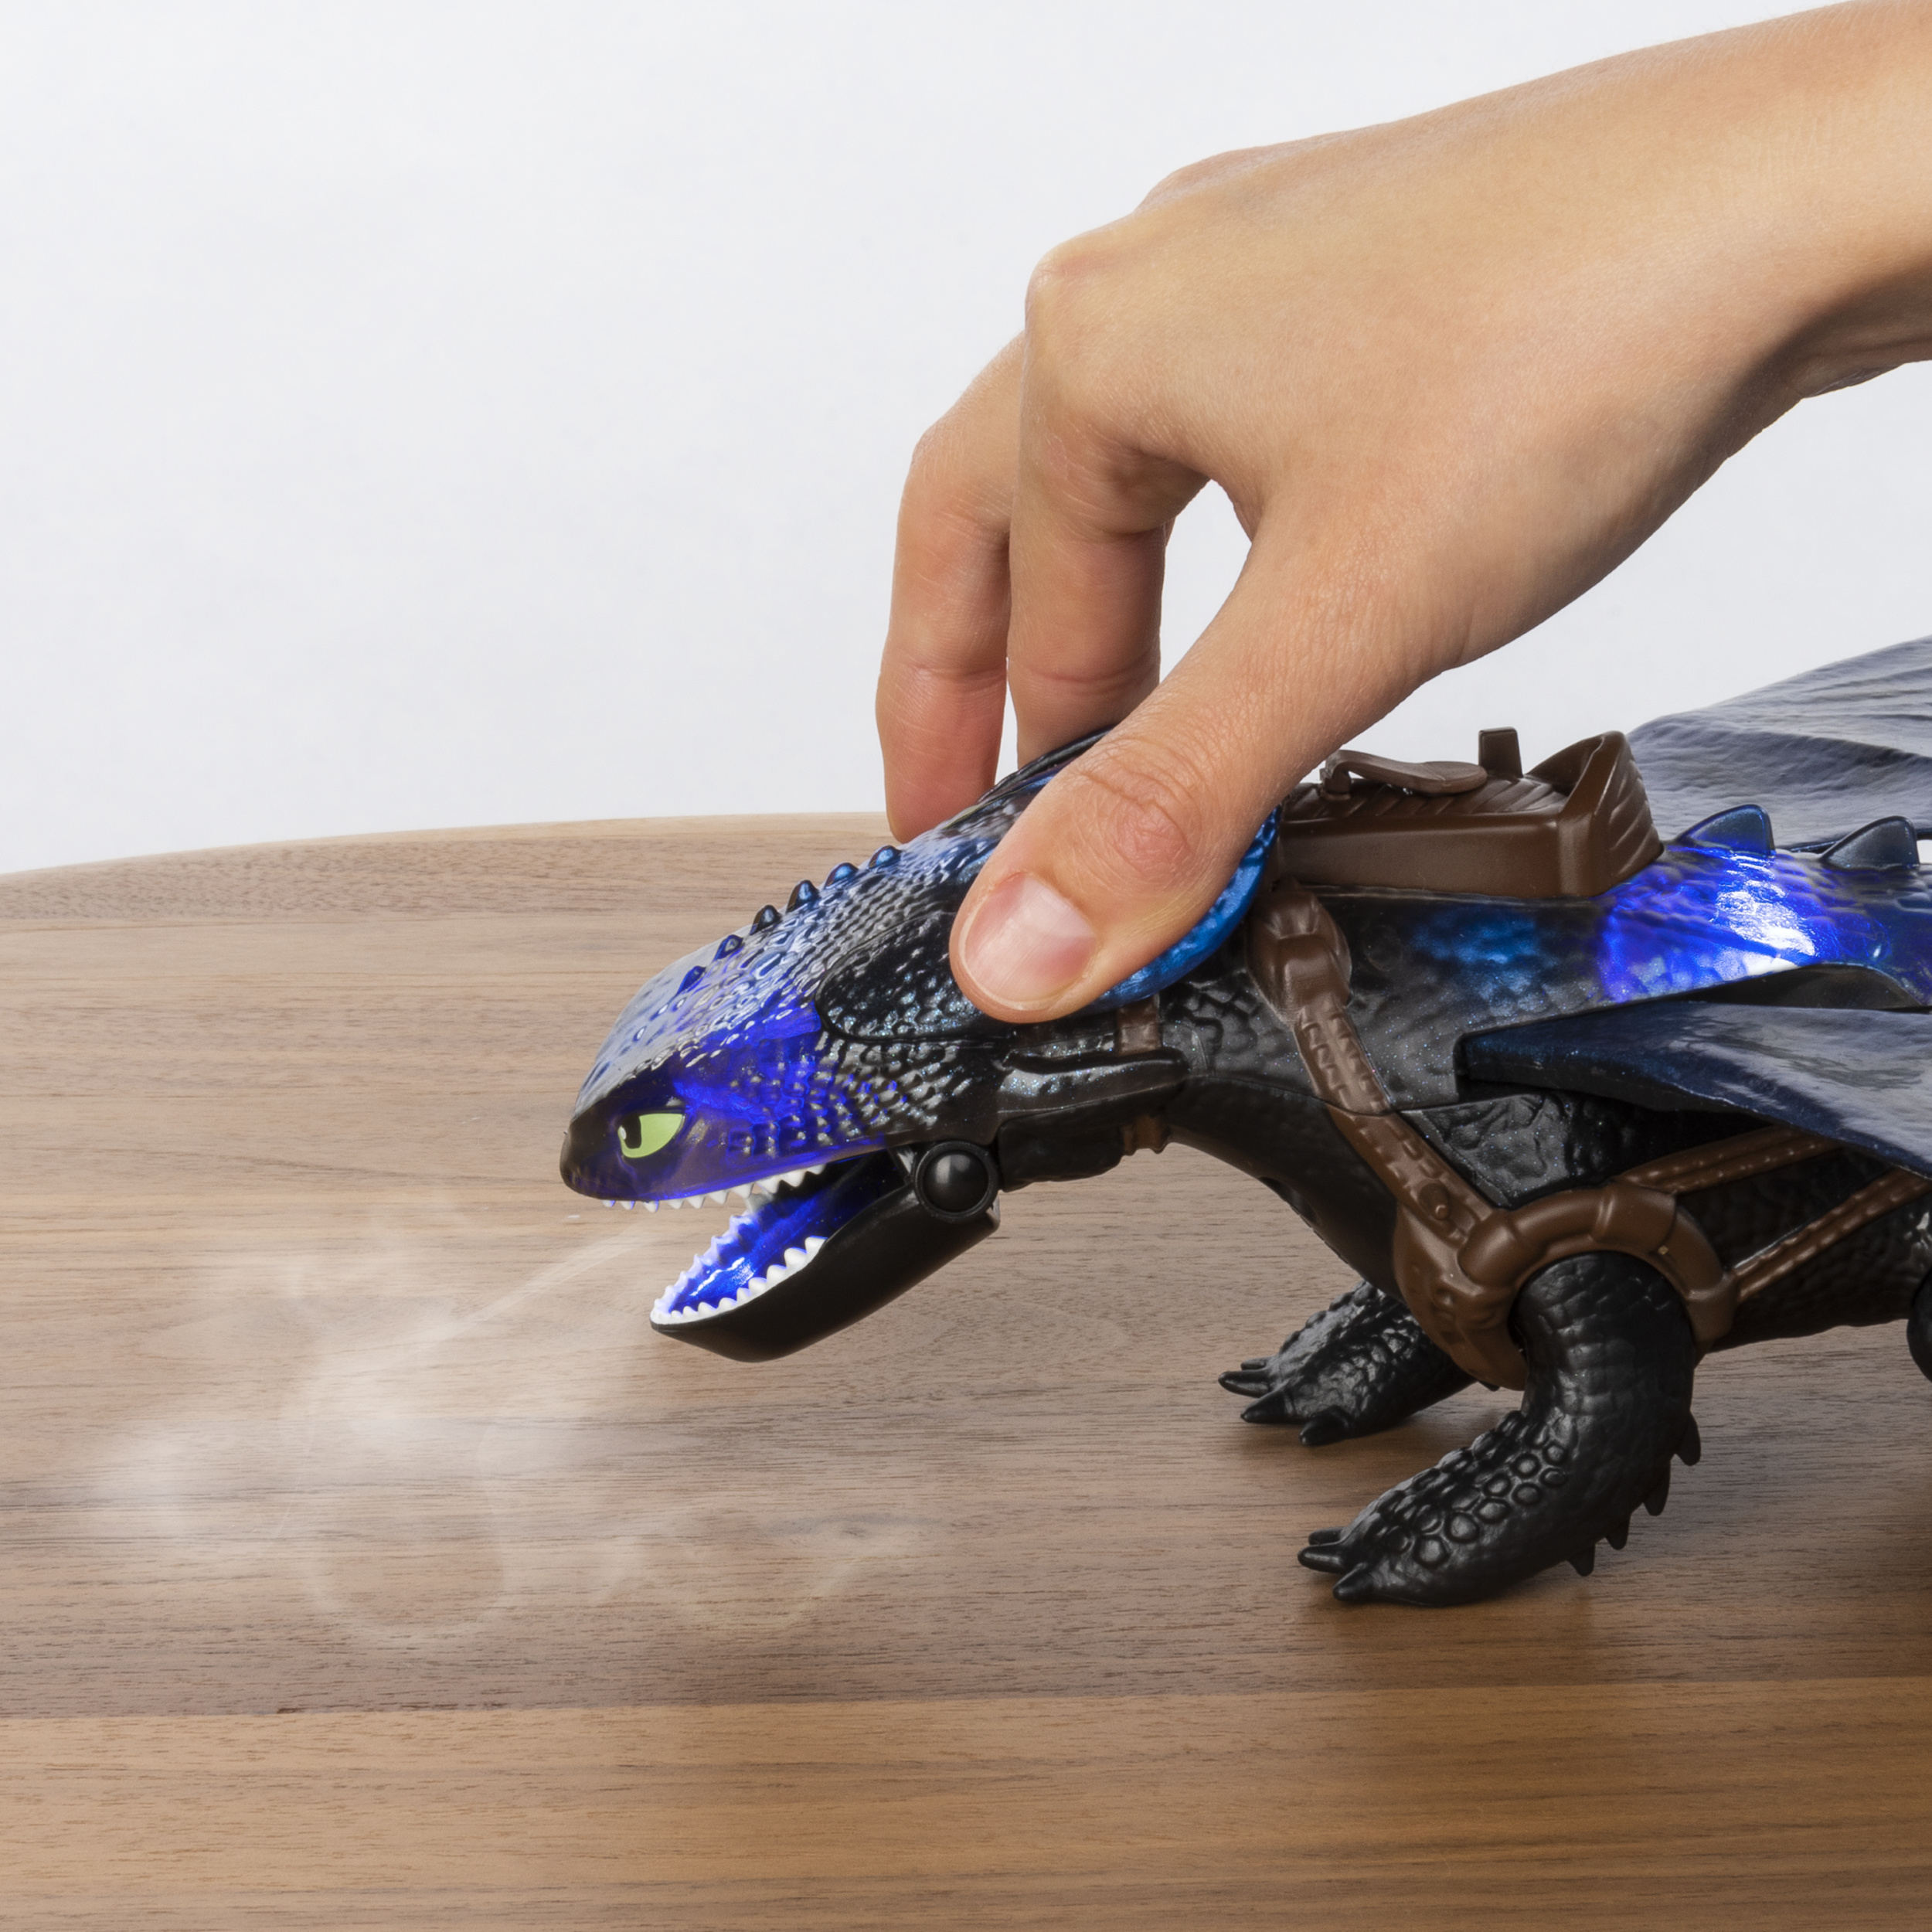 DreamWorks Dragons, Giant Fire Breathing Toothless Action Figure, 20-inch Dragon with Fire Breathing Effects - image 4 of 8